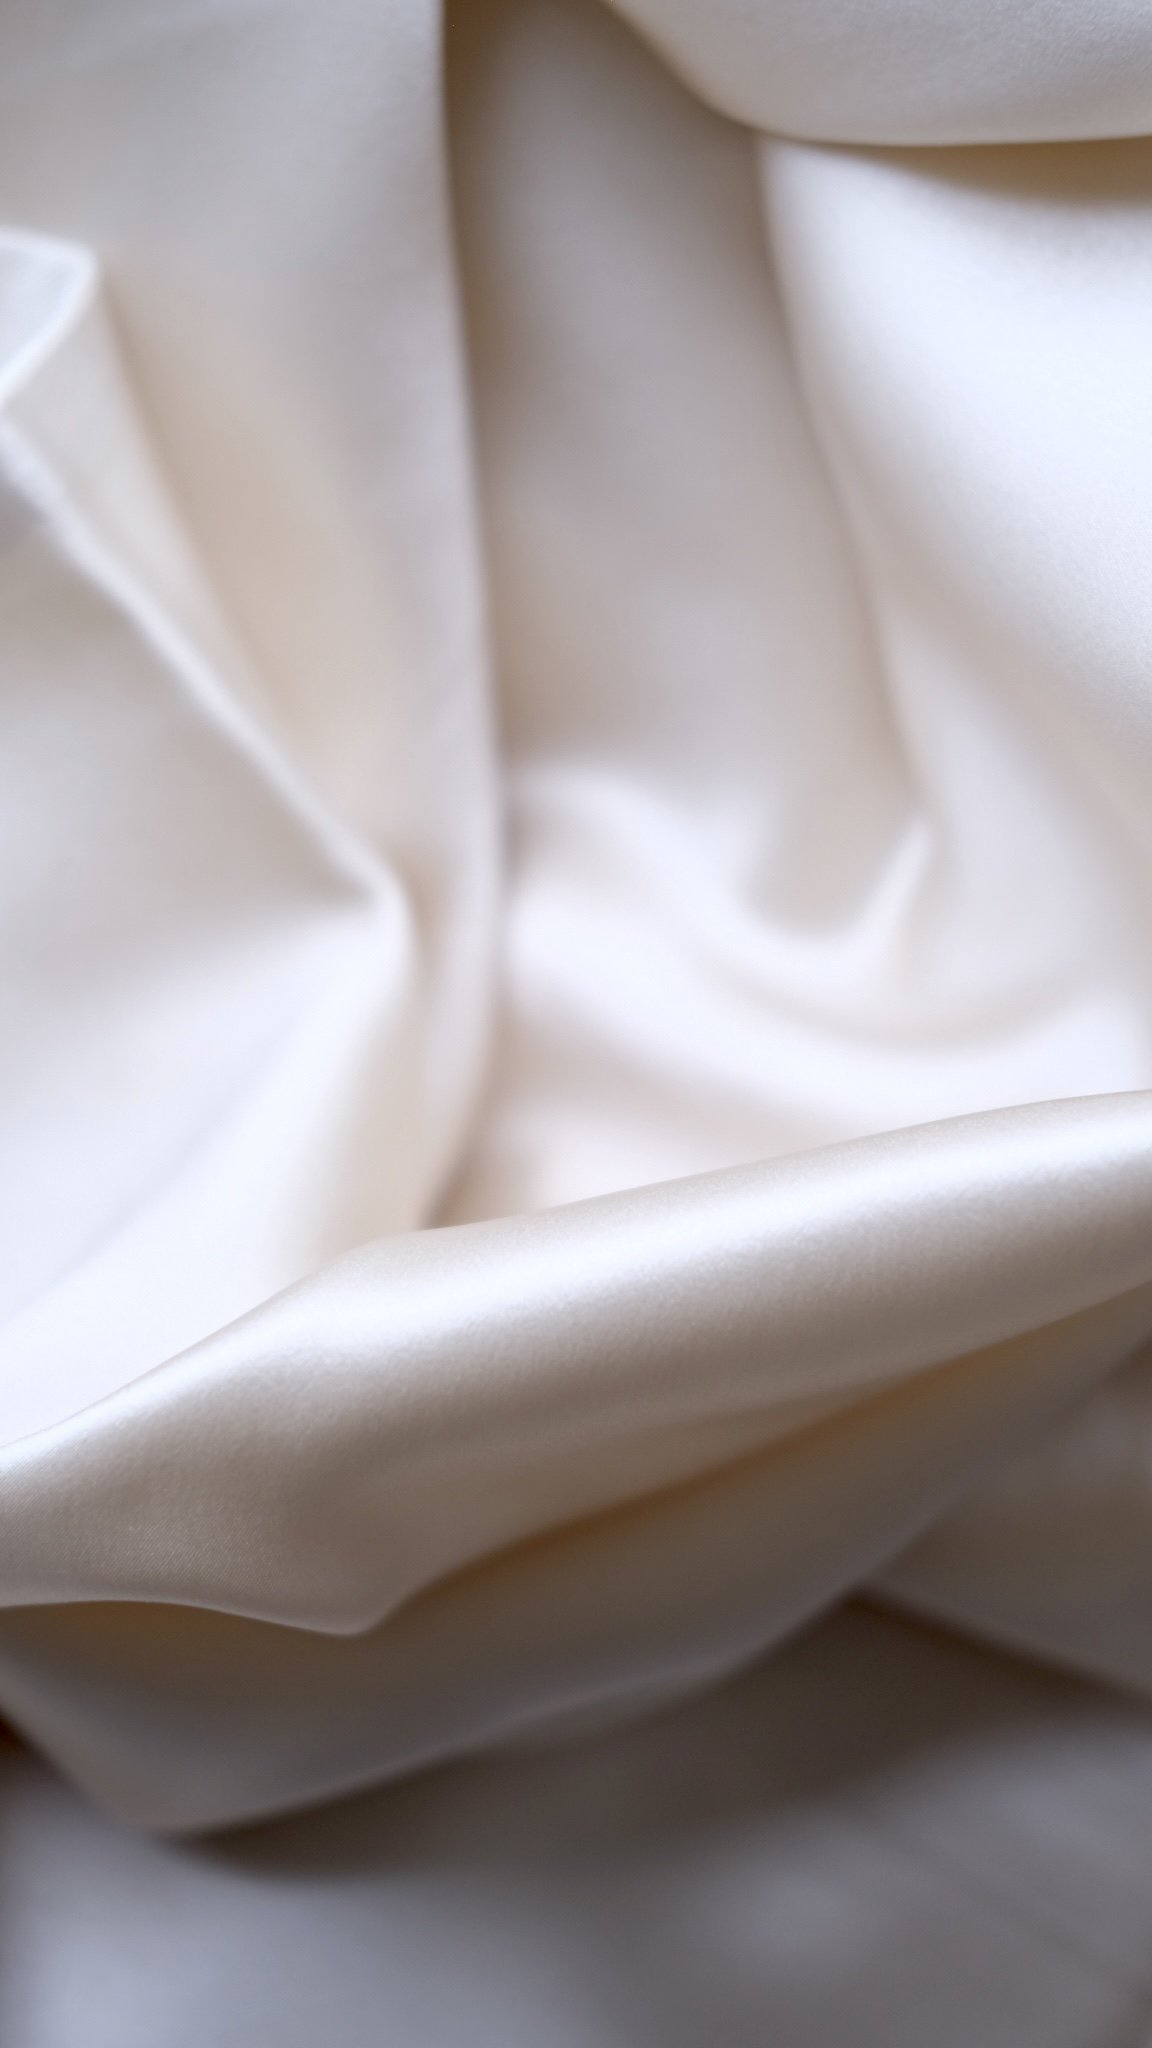 Find out the best silk pillowcase for curly hair (and all other hair types). I’ll share all the benefits of a silk pillowcase and which is better: a silk v satin pillowcase. I luckily have a 40% off discount code for one of the best silk pillowcases!